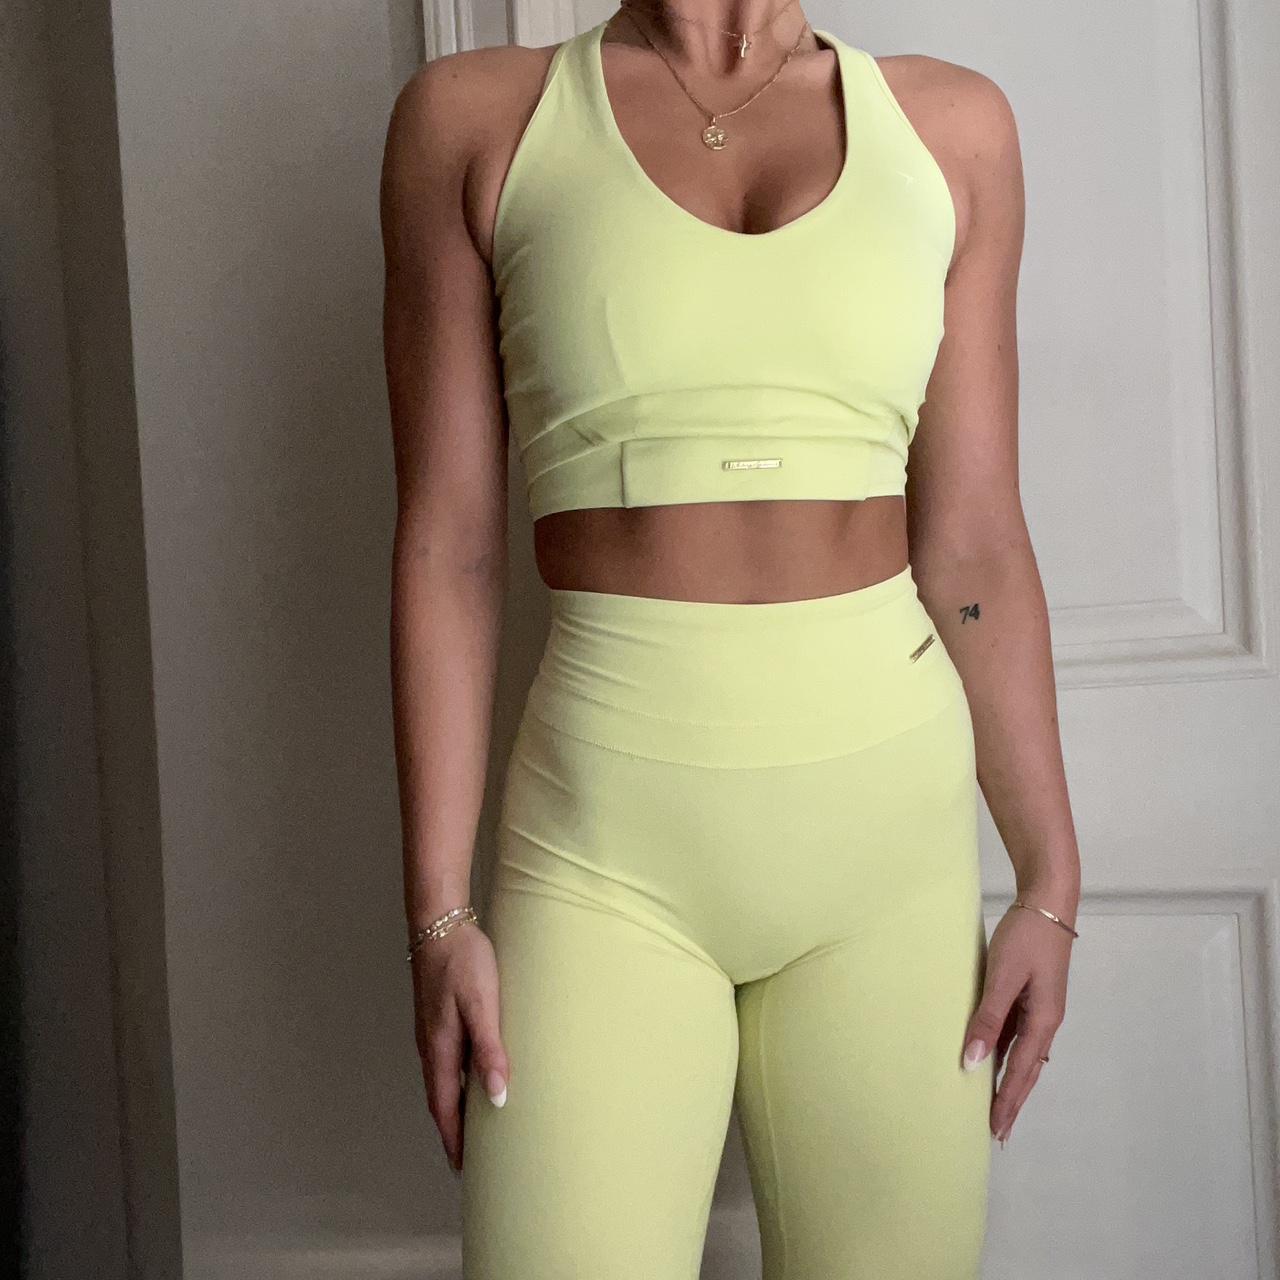 SMALL WHITE 2 PIECE WORKOUT SET LEGGINGS AND CROP - Depop